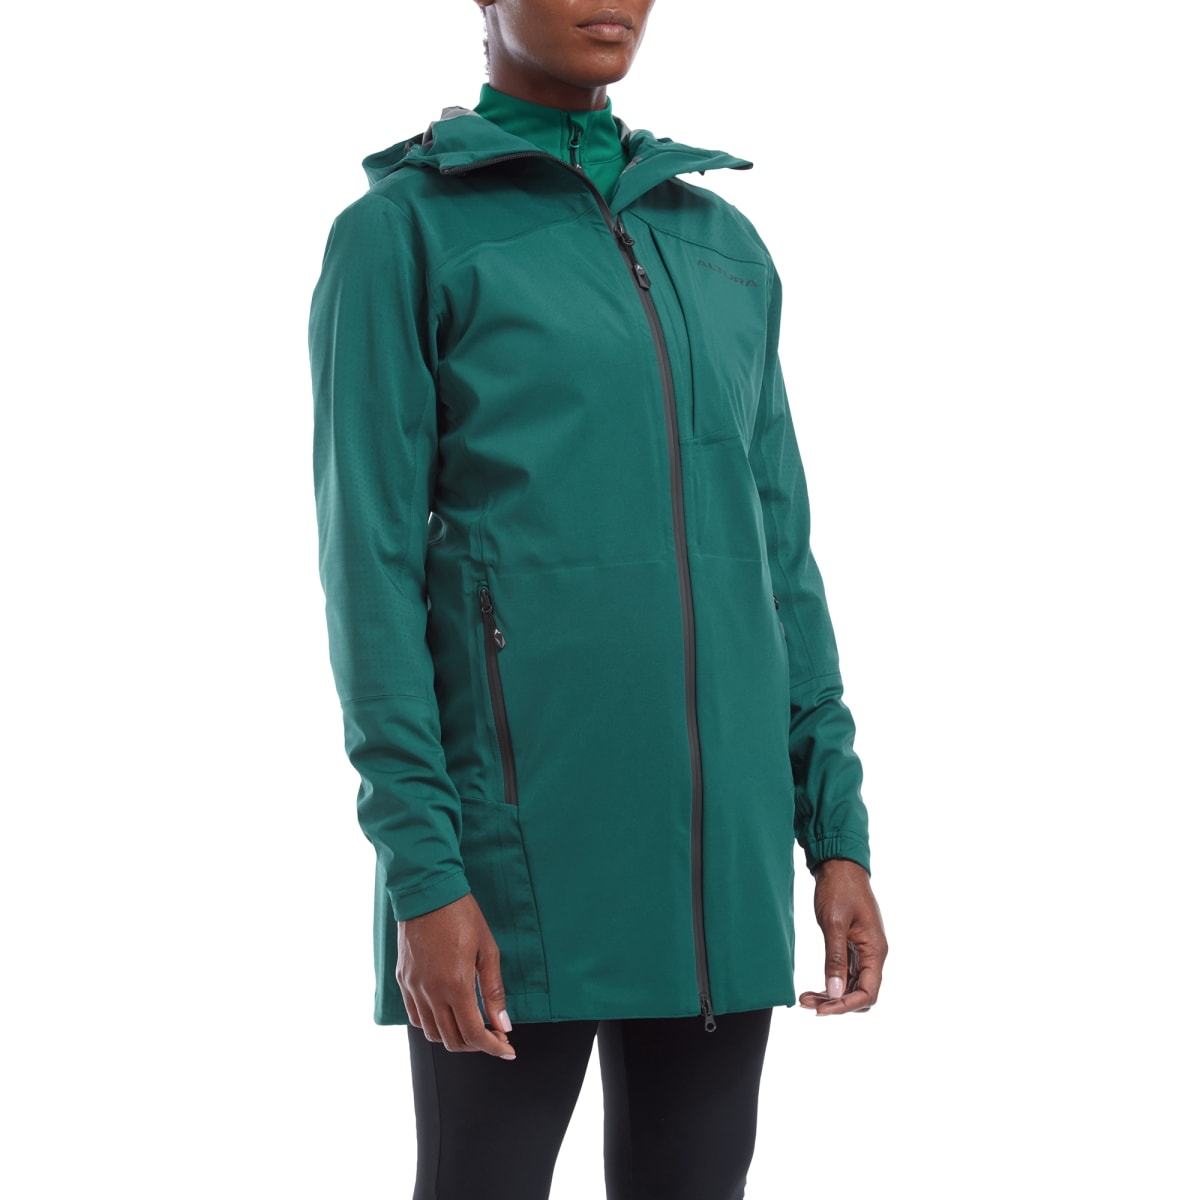 Altura  Nightvision Zephyr Womens Stretch Jacket 8 GREEN/TEAL